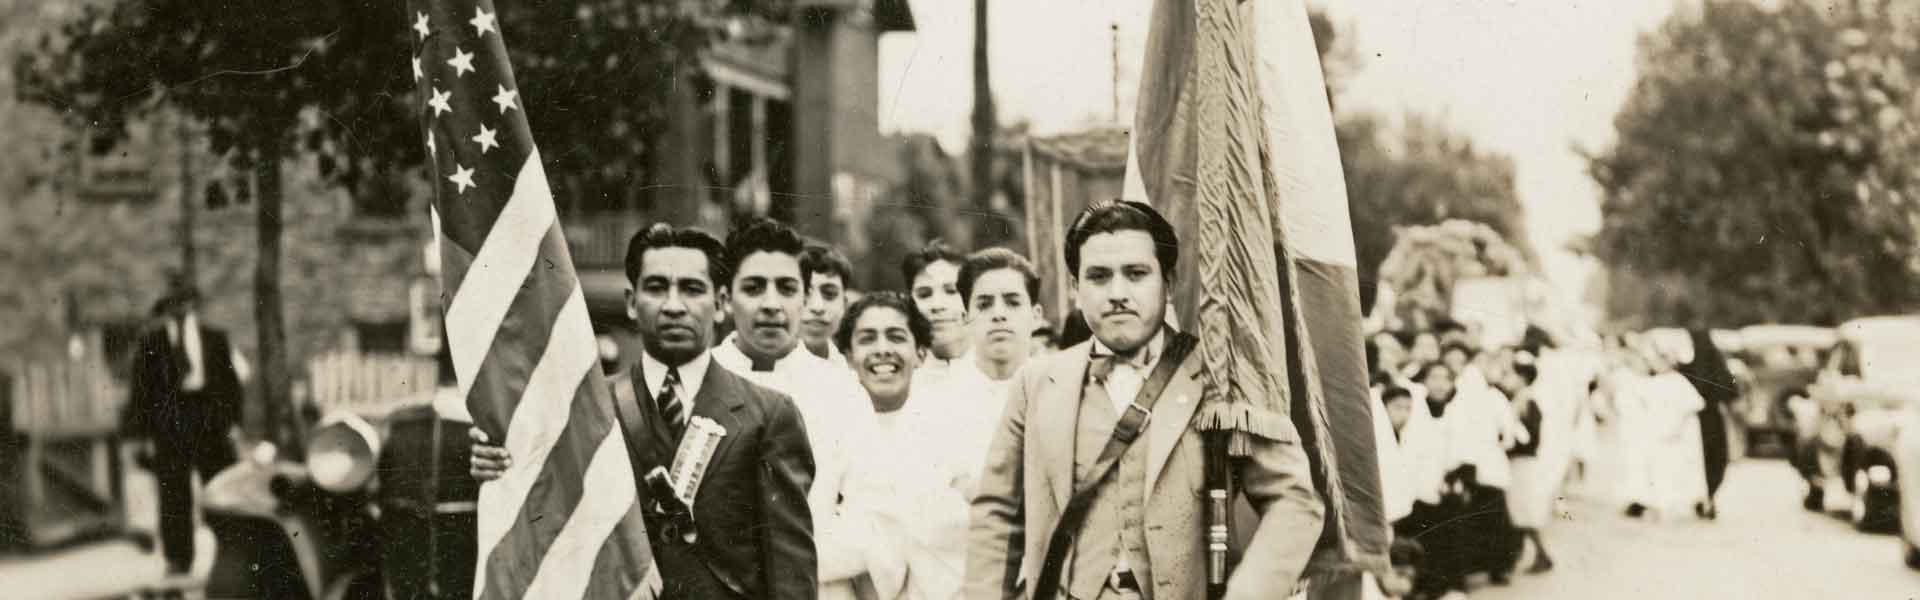 Inaugural mass at Our Lady of Guadalupe, 1942, parade with two male flag-bearers, one with American flag and other with Mexican